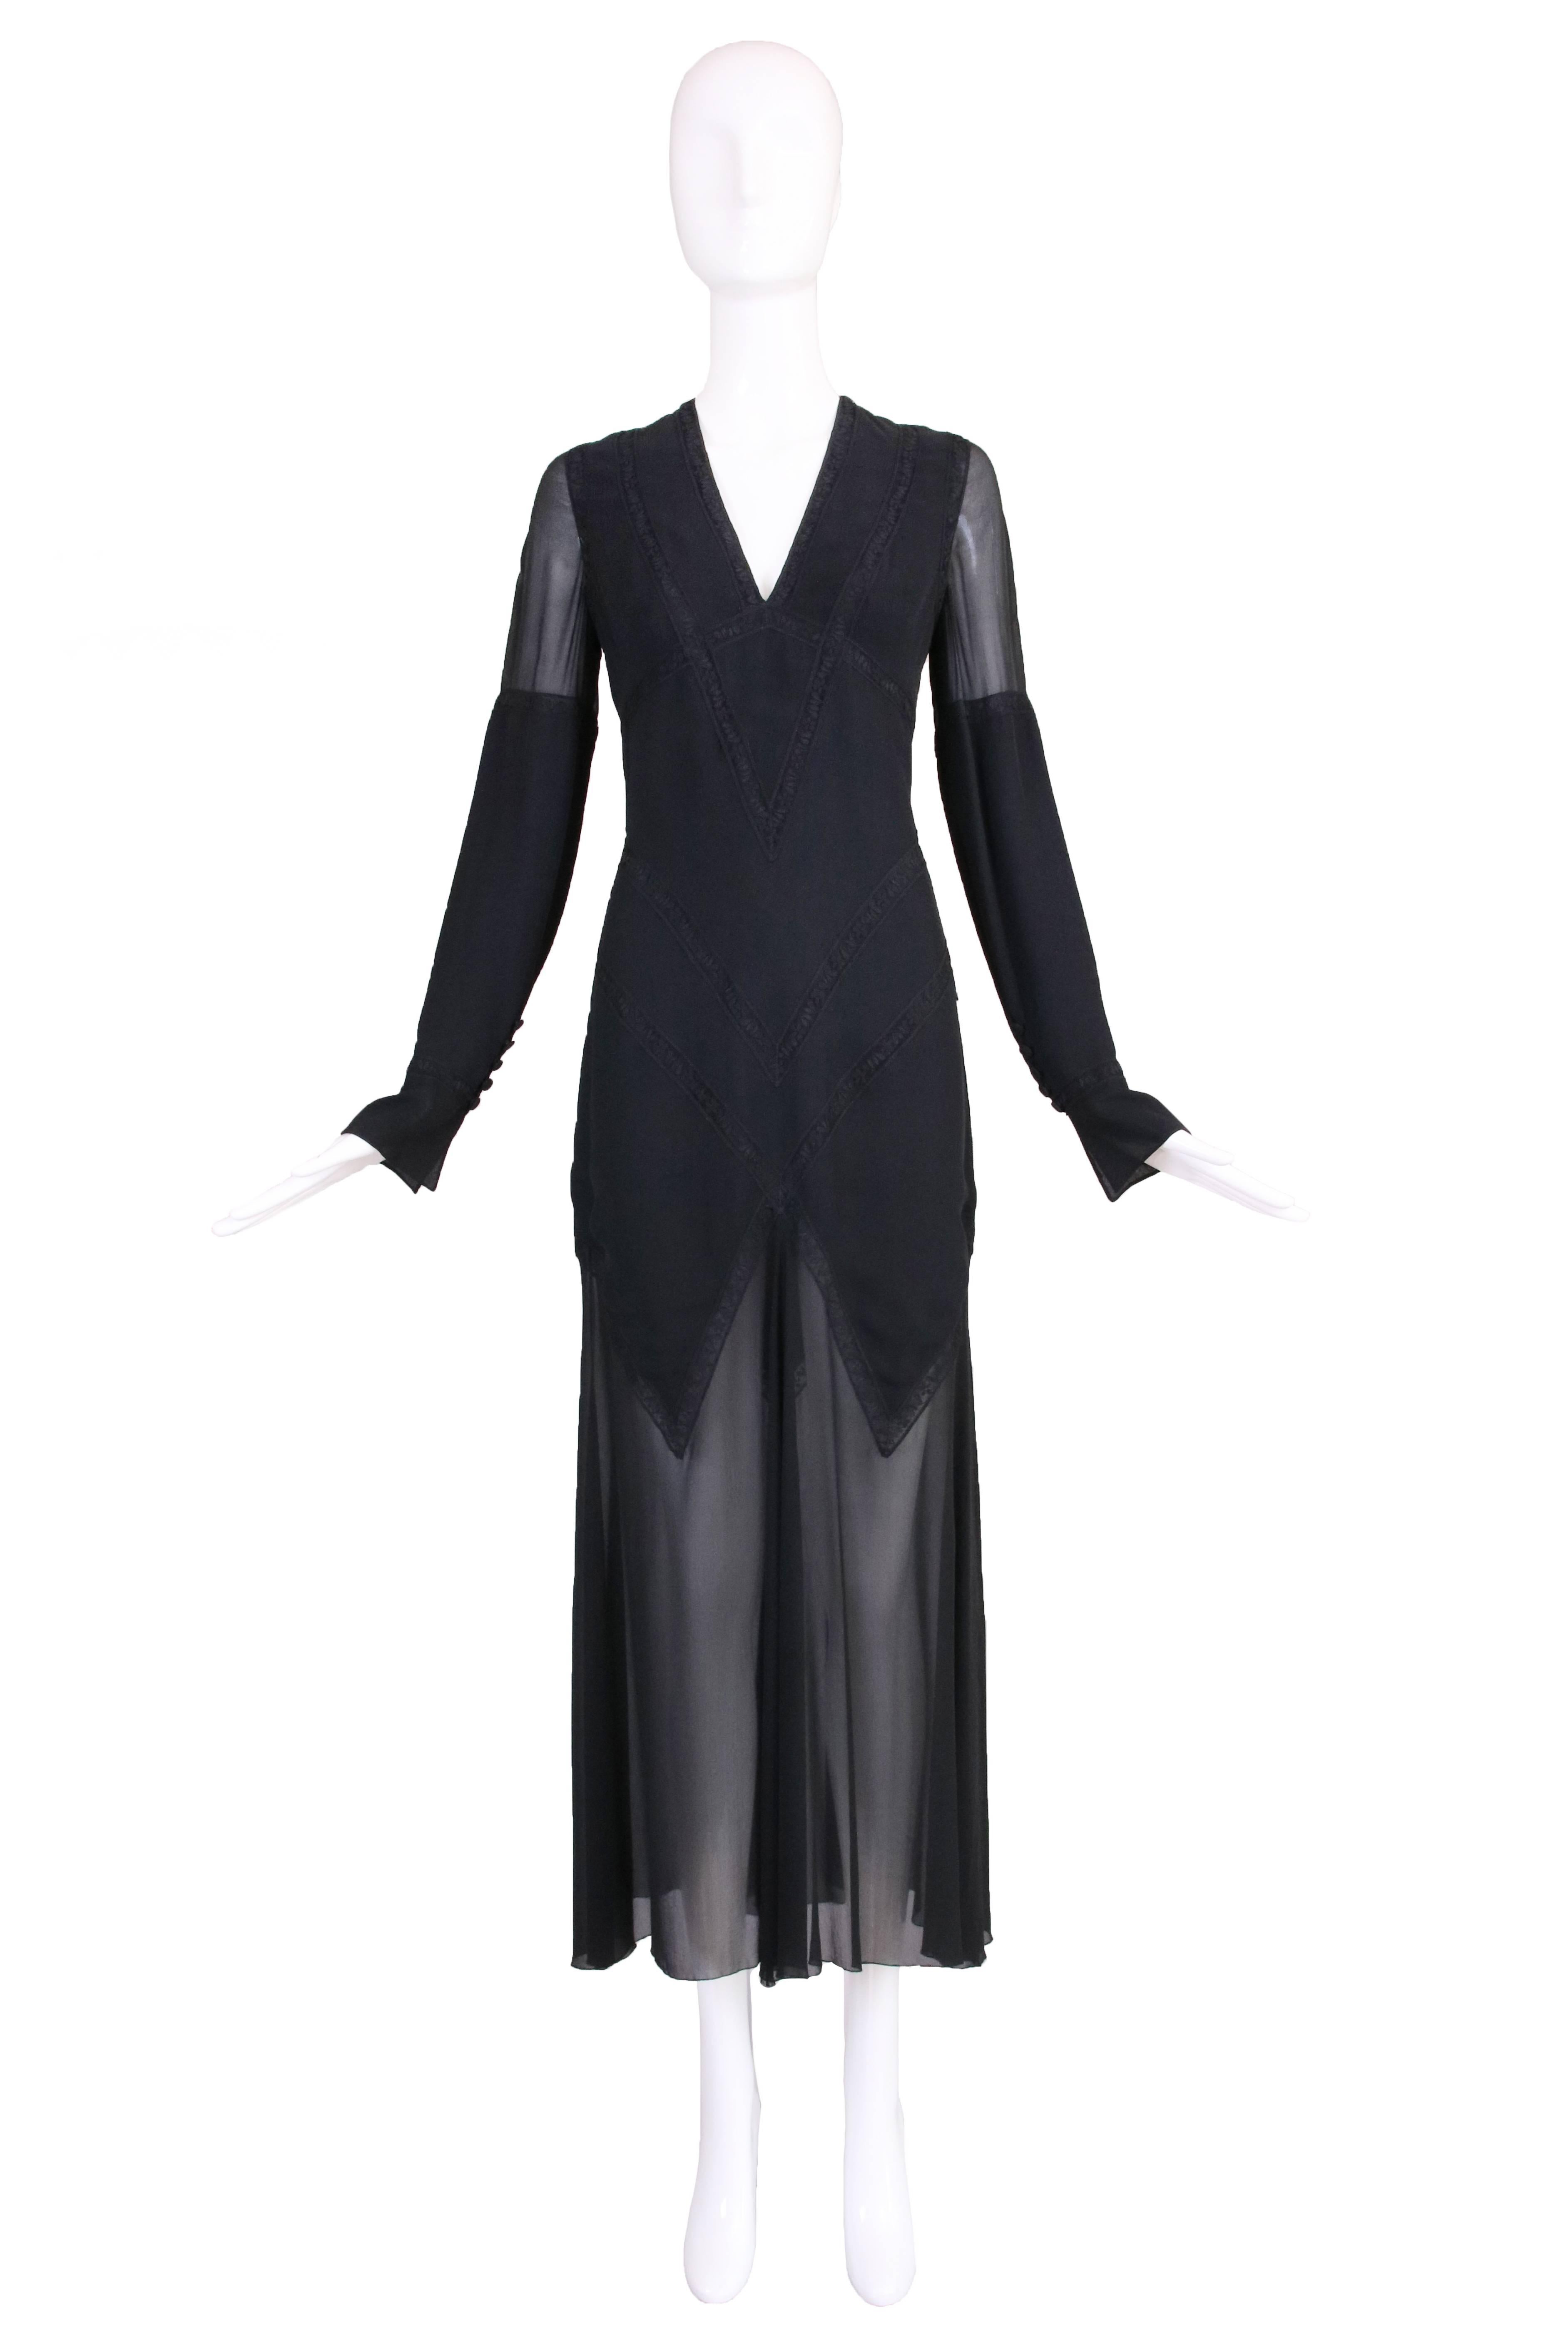 Karl Lagerfeld Black Silk & Lace Inset Deep V-Neck Evening Dress W/Chiffon Skirt In Excellent Condition In Studio City, CA